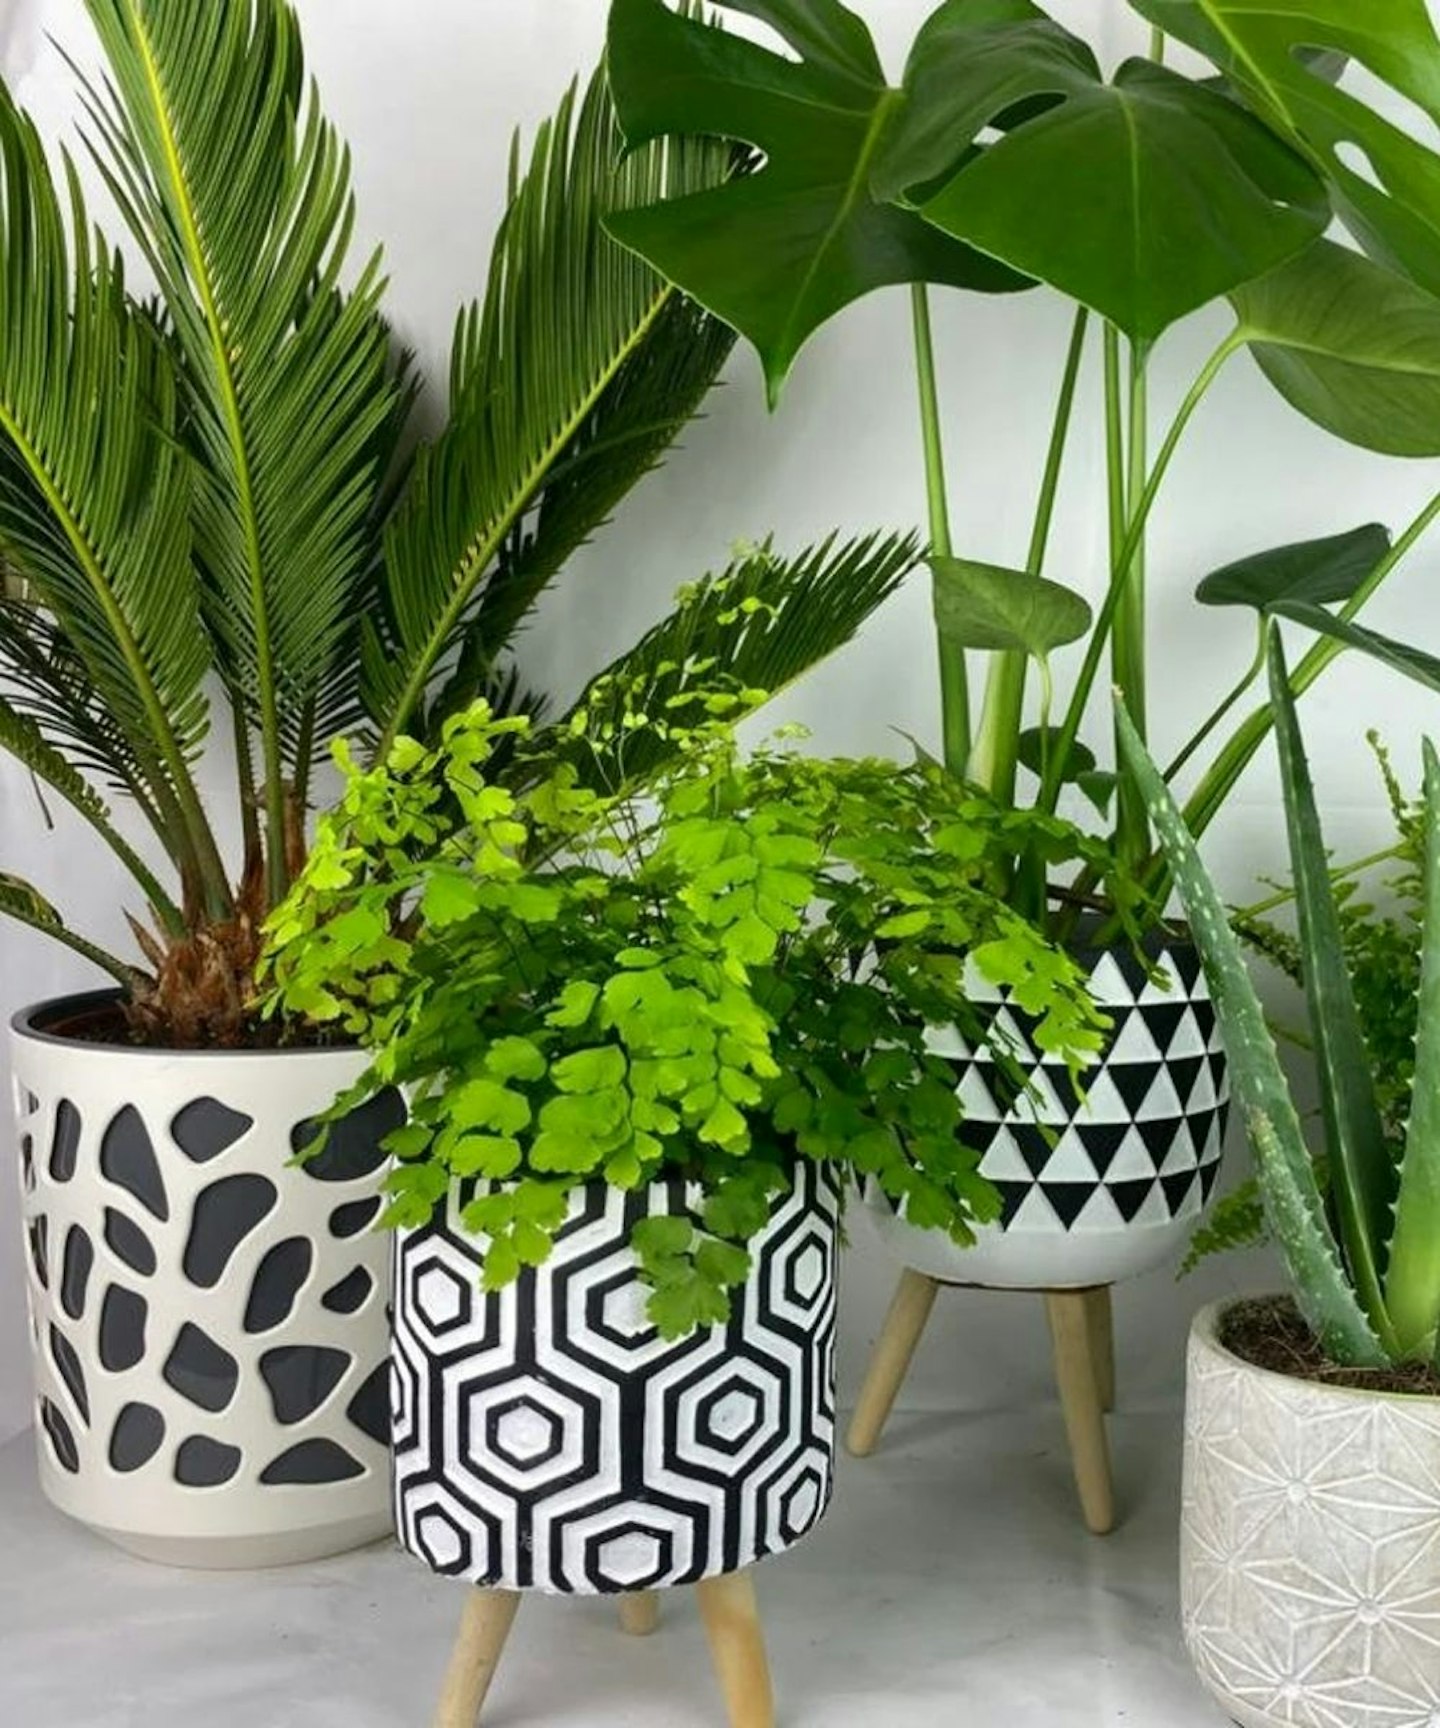 Plants By Post Subscription, From £25